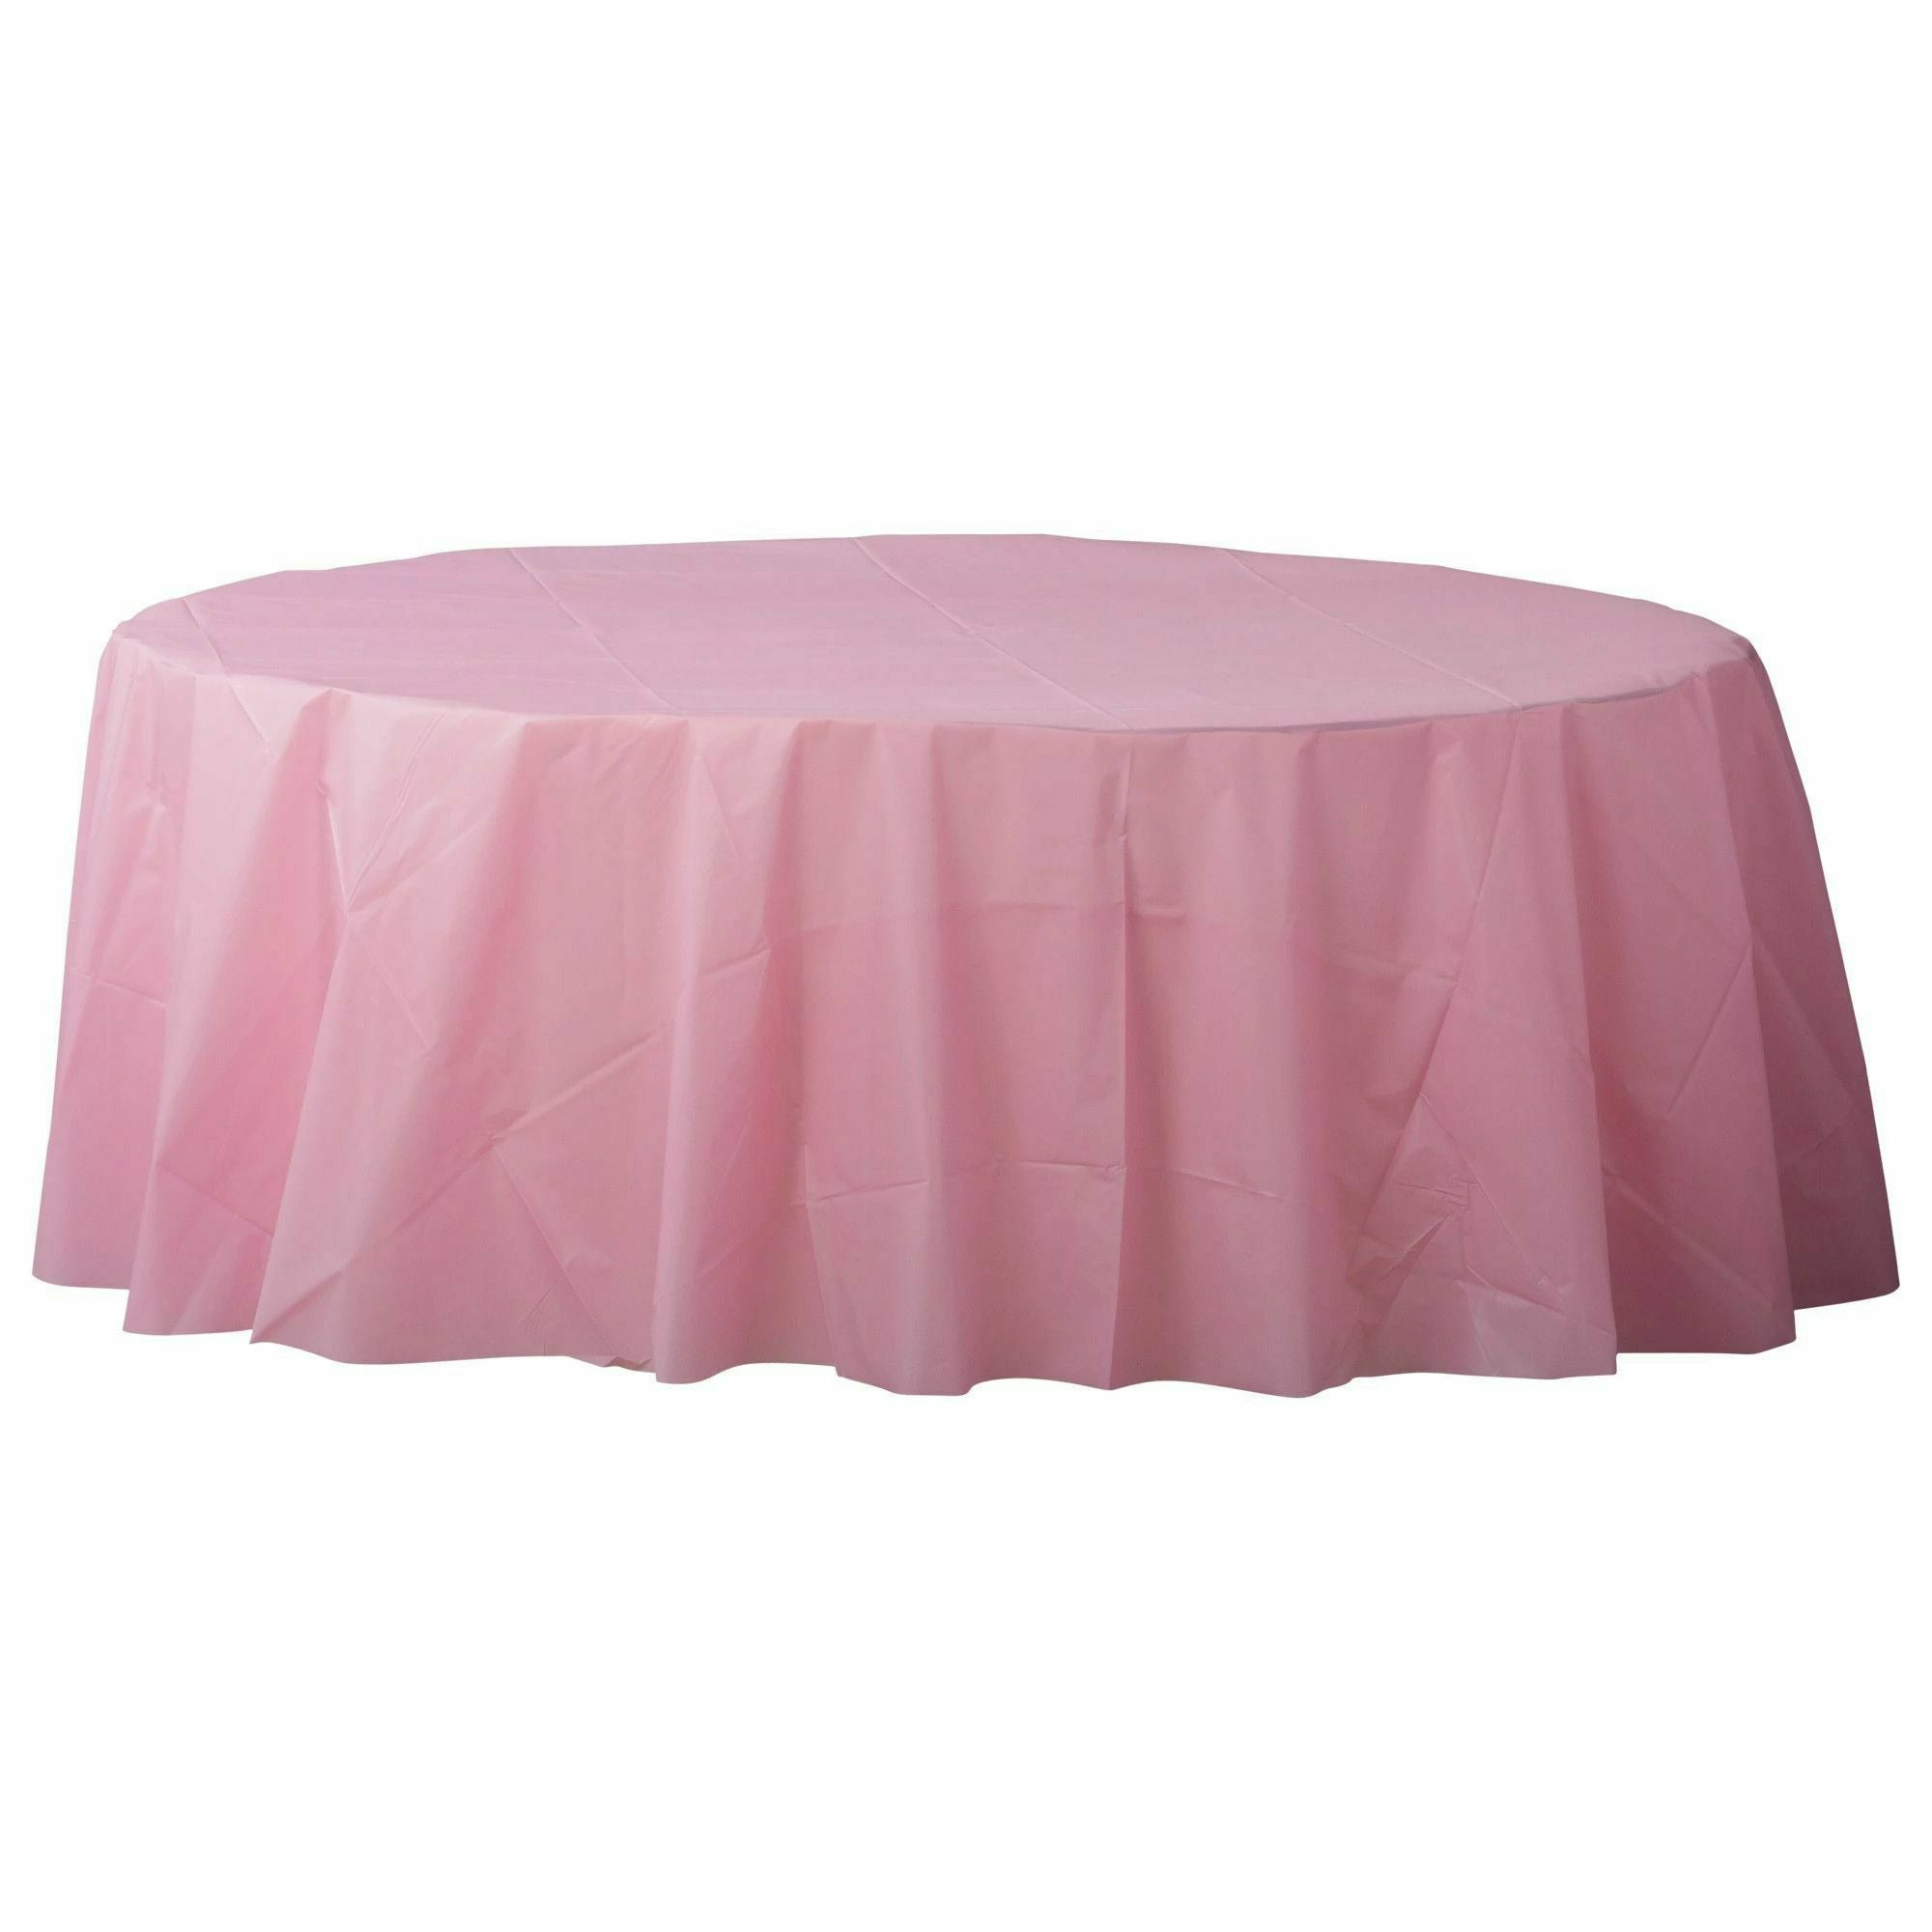 Amscan BASIC New Pink - 84" Round Plastic Table Cover